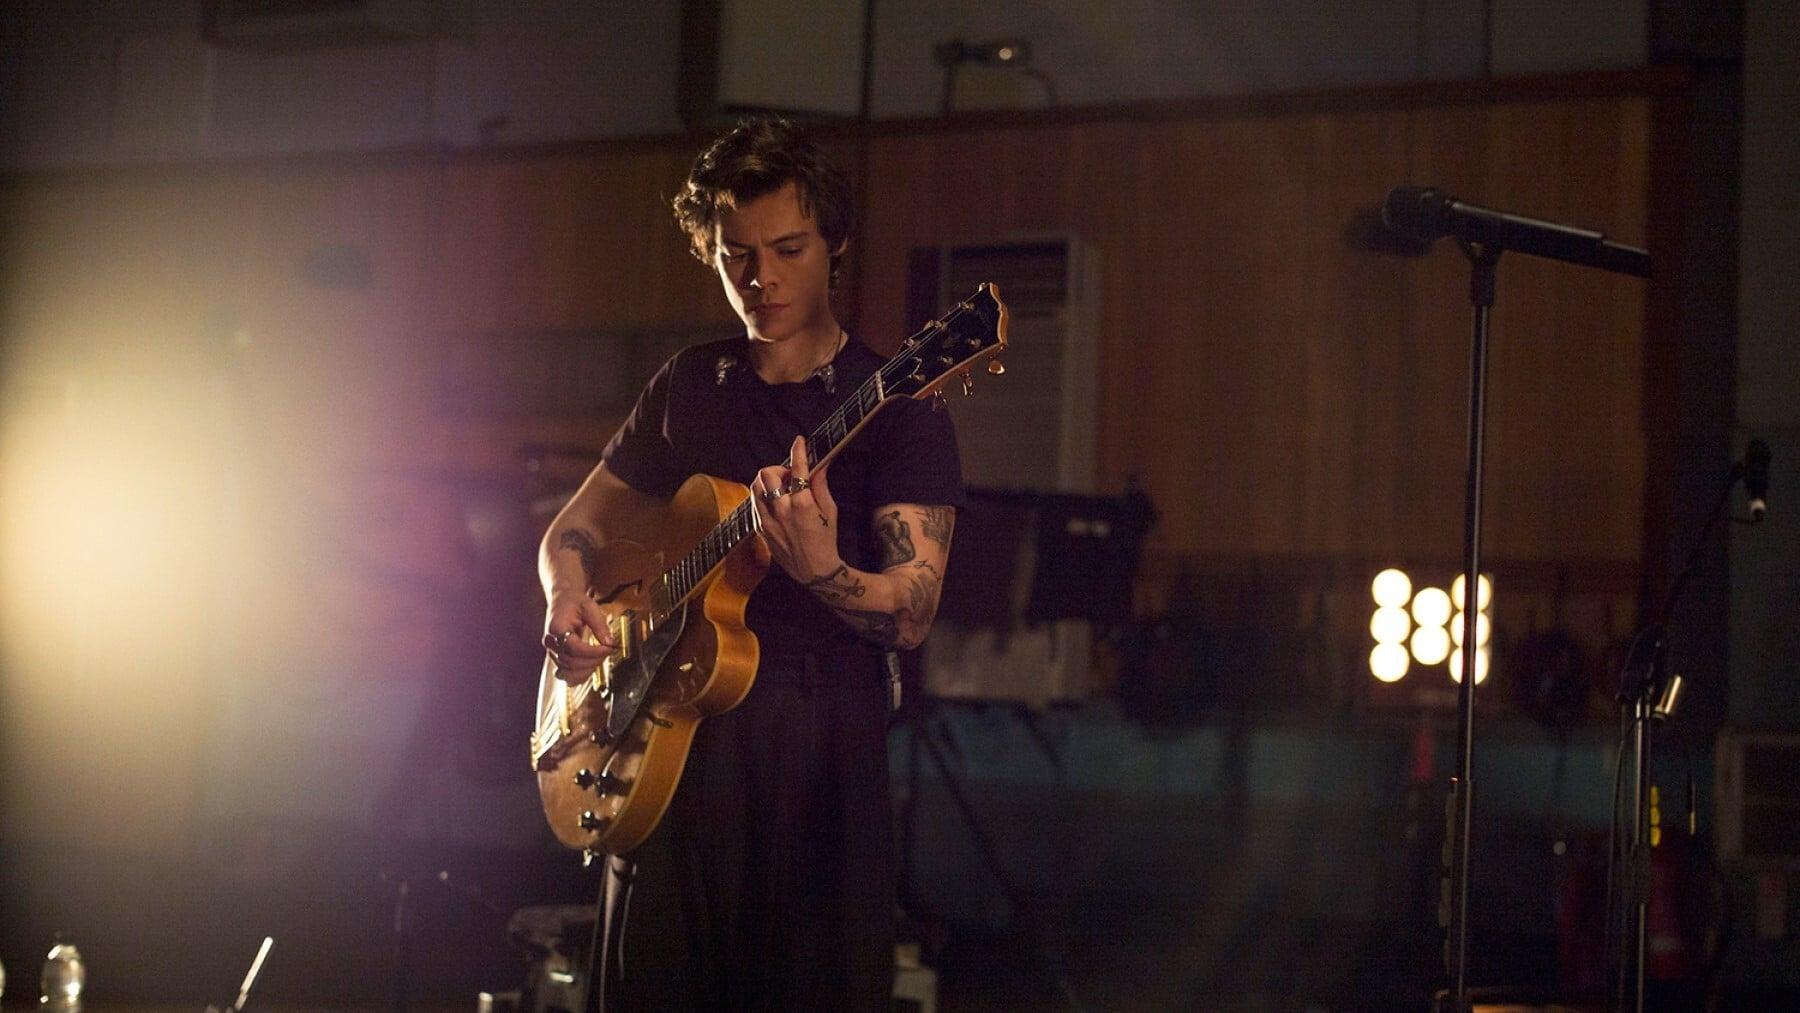 Harry Styles: Behind the Album - The Performances backdrop